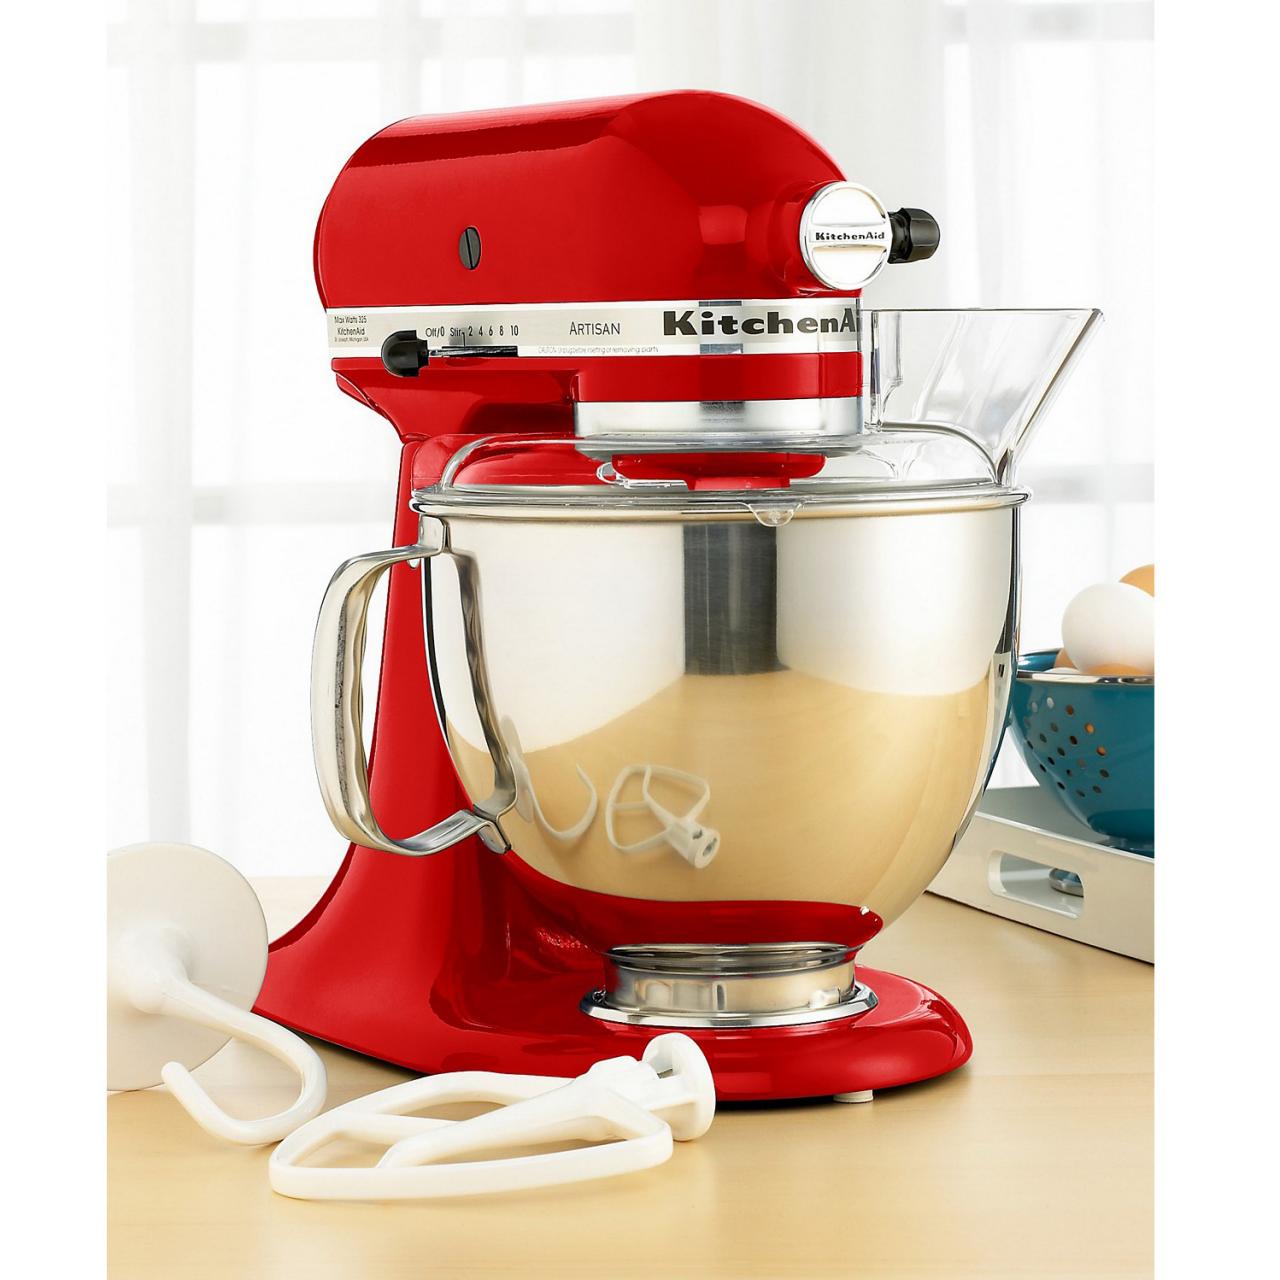 The KitchenAid Professional Stand Mixer Is Currently $200 Off At